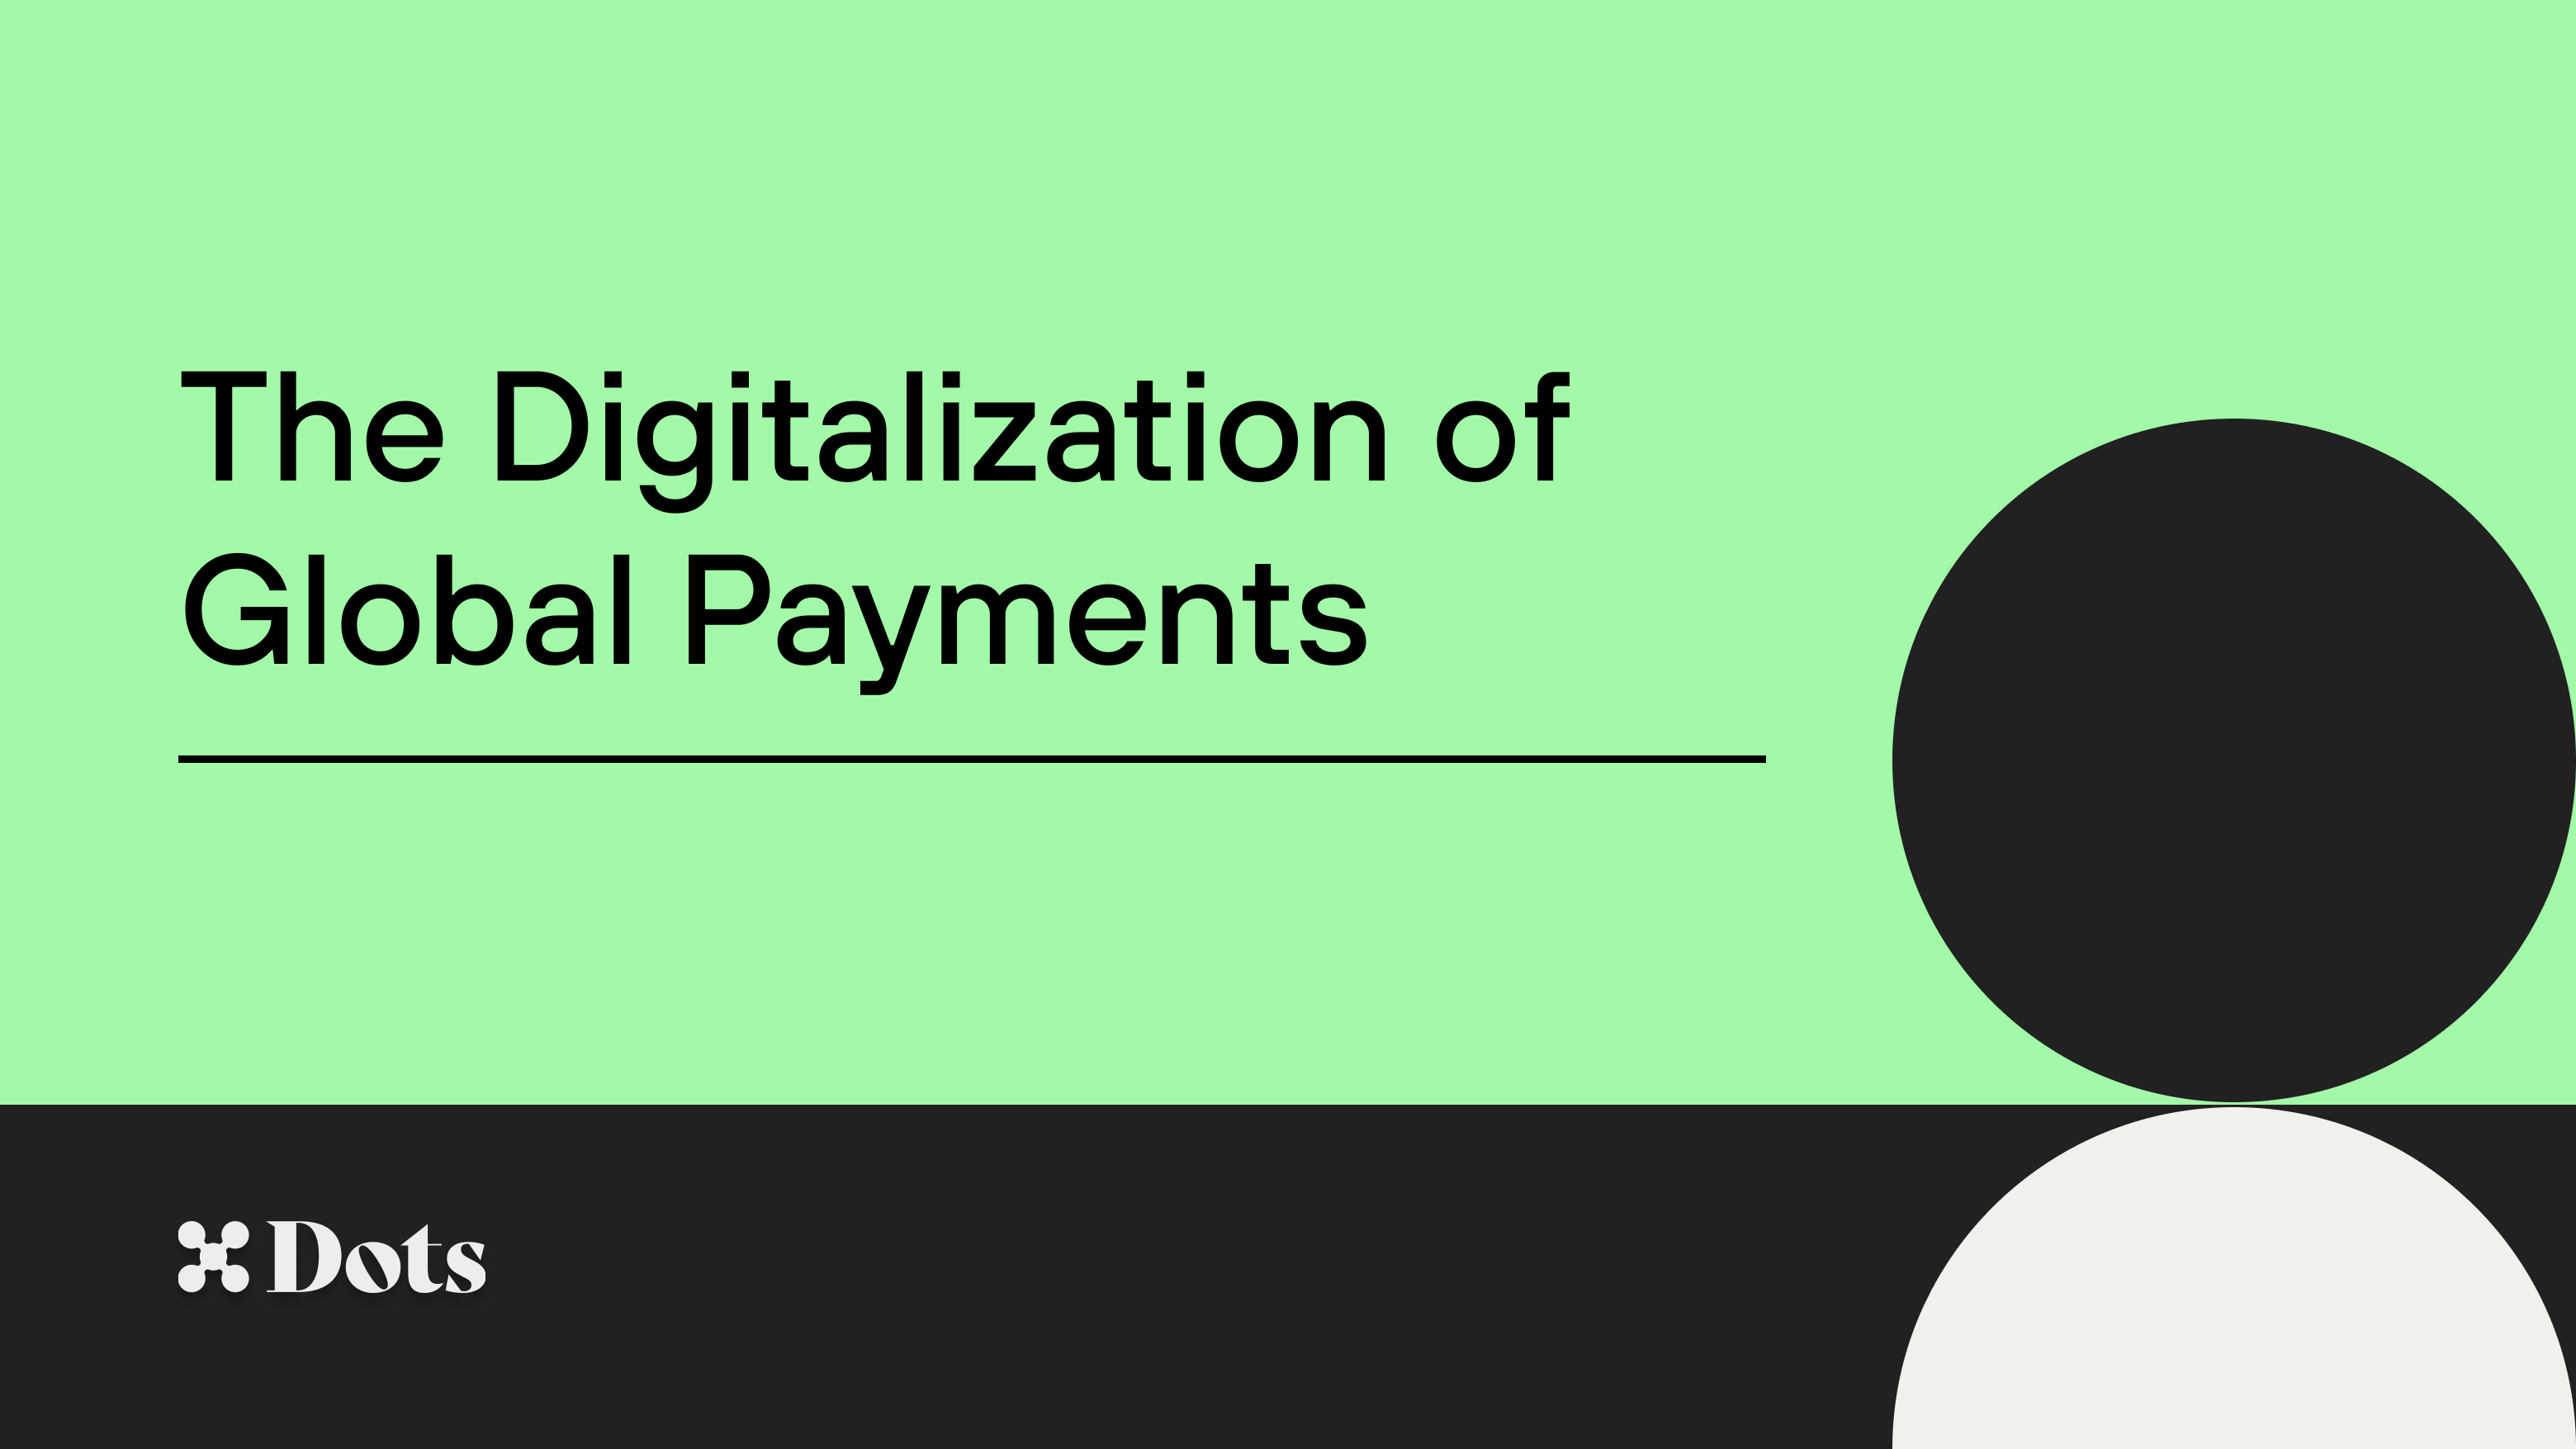 The Digitalization of Global Payments - Dots